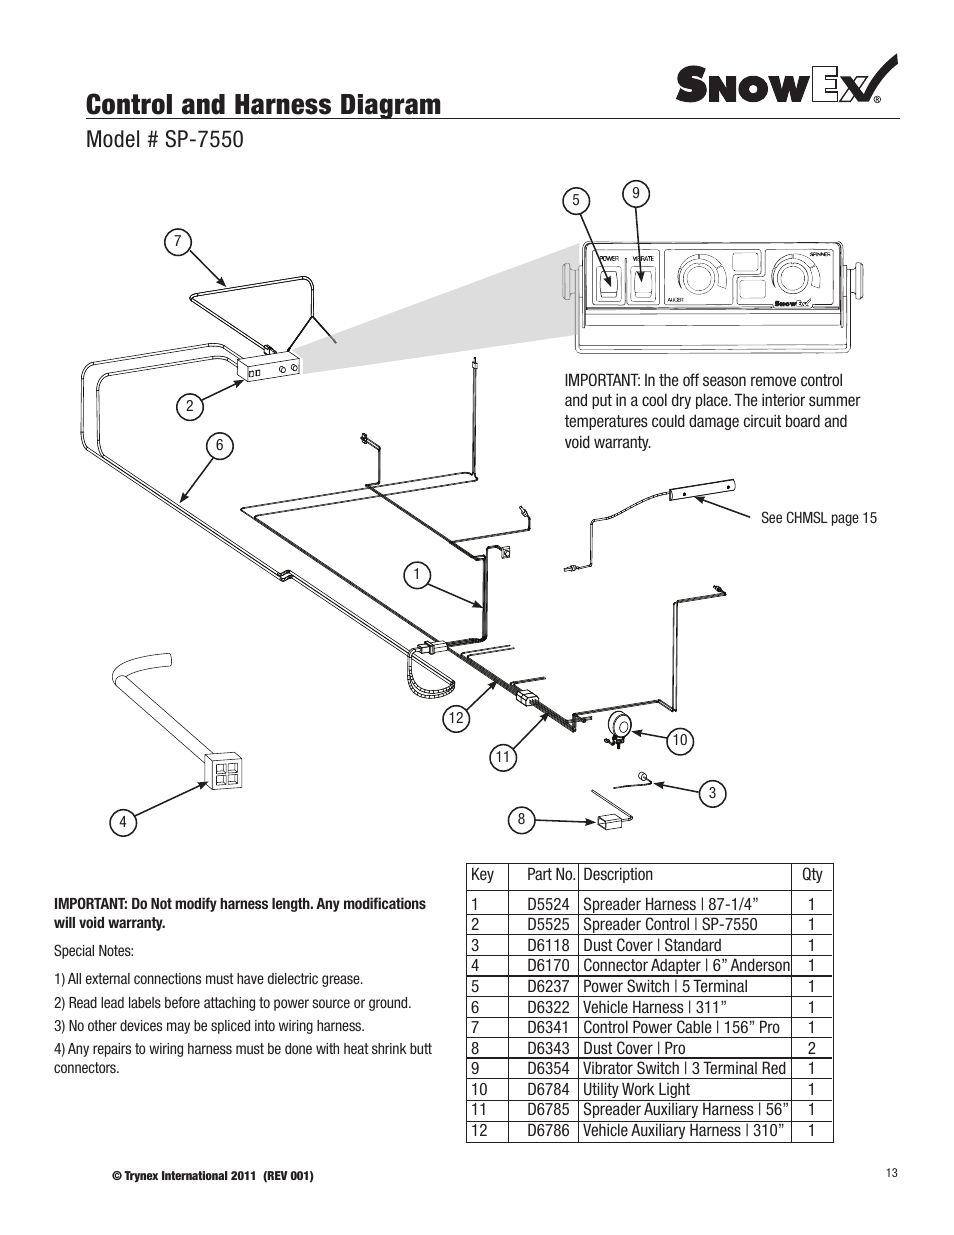 Control And Harness Diagram Model Sp 7550 Snowex Sp 7550 User Manual Page 13 36